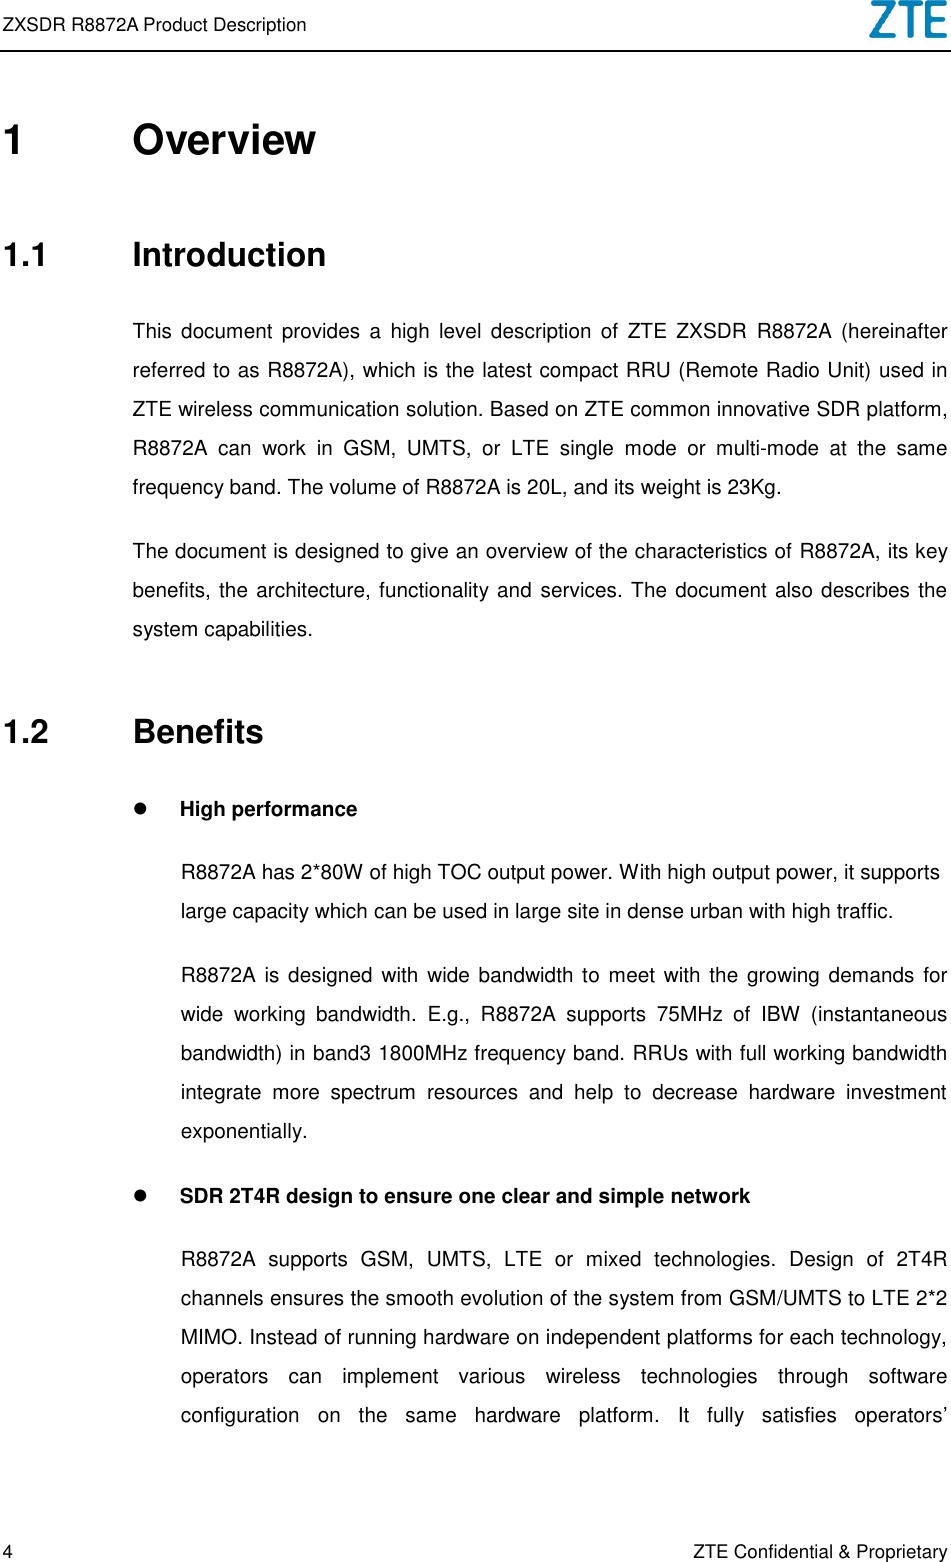 ZXSDR R8872A Product Description   4 ZTE Confidential &amp; Proprietary 1  Overview 1.1  Introduction This  document  provides  a  high  level  description  of  ZTE  ZXSDR  R8872A  (hereinafter referred to as R8872A), which is the latest compact RRU (Remote Radio Unit) used in ZTE wireless communication solution. Based on ZTE common innovative SDR platform, R8872A  can  work  in  GSM,  UMTS,  or  LTE  single  mode  or  multi-mode  at  the  same frequency band. The volume of R8872A is 20L, and its weight is 23Kg.   The document is designed to give an overview of the characteristics of R8872A, its key benefits, the architecture, functionality and services. The document also describes the system capabilities. 1.2  Benefits  High performance R8872A has 2*80W of high TOC output power. With high output power, it supports large capacity which can be used in large site in dense urban with high traffic.   R8872A is designed  with  wide bandwidth to meet with the  growing demands for wide  working  bandwidth.  E.g.,  R8872A  supports  75MHz  of  IBW  (instantaneous bandwidth) in band3 1800MHz frequency band. RRUs with full working bandwidth integrate  more  spectrum  resources  and  help  to  decrease  hardware  investment exponentially.    SDR 2T4R design to ensure one clear and simple network R8872A  supports  GSM,  UMTS,  LTE  or  mixed  technologies.  Design  of  2T4R channels ensures the smooth evolution of the system from GSM/UMTS to LTE 2*2 MIMO. Instead of running hardware on independent platforms for each technology, operators  can  implement  various  wireless  technologies  through  software configuration  on  the  same  hardware  platform.  It  fully  satisfies  operators’ 